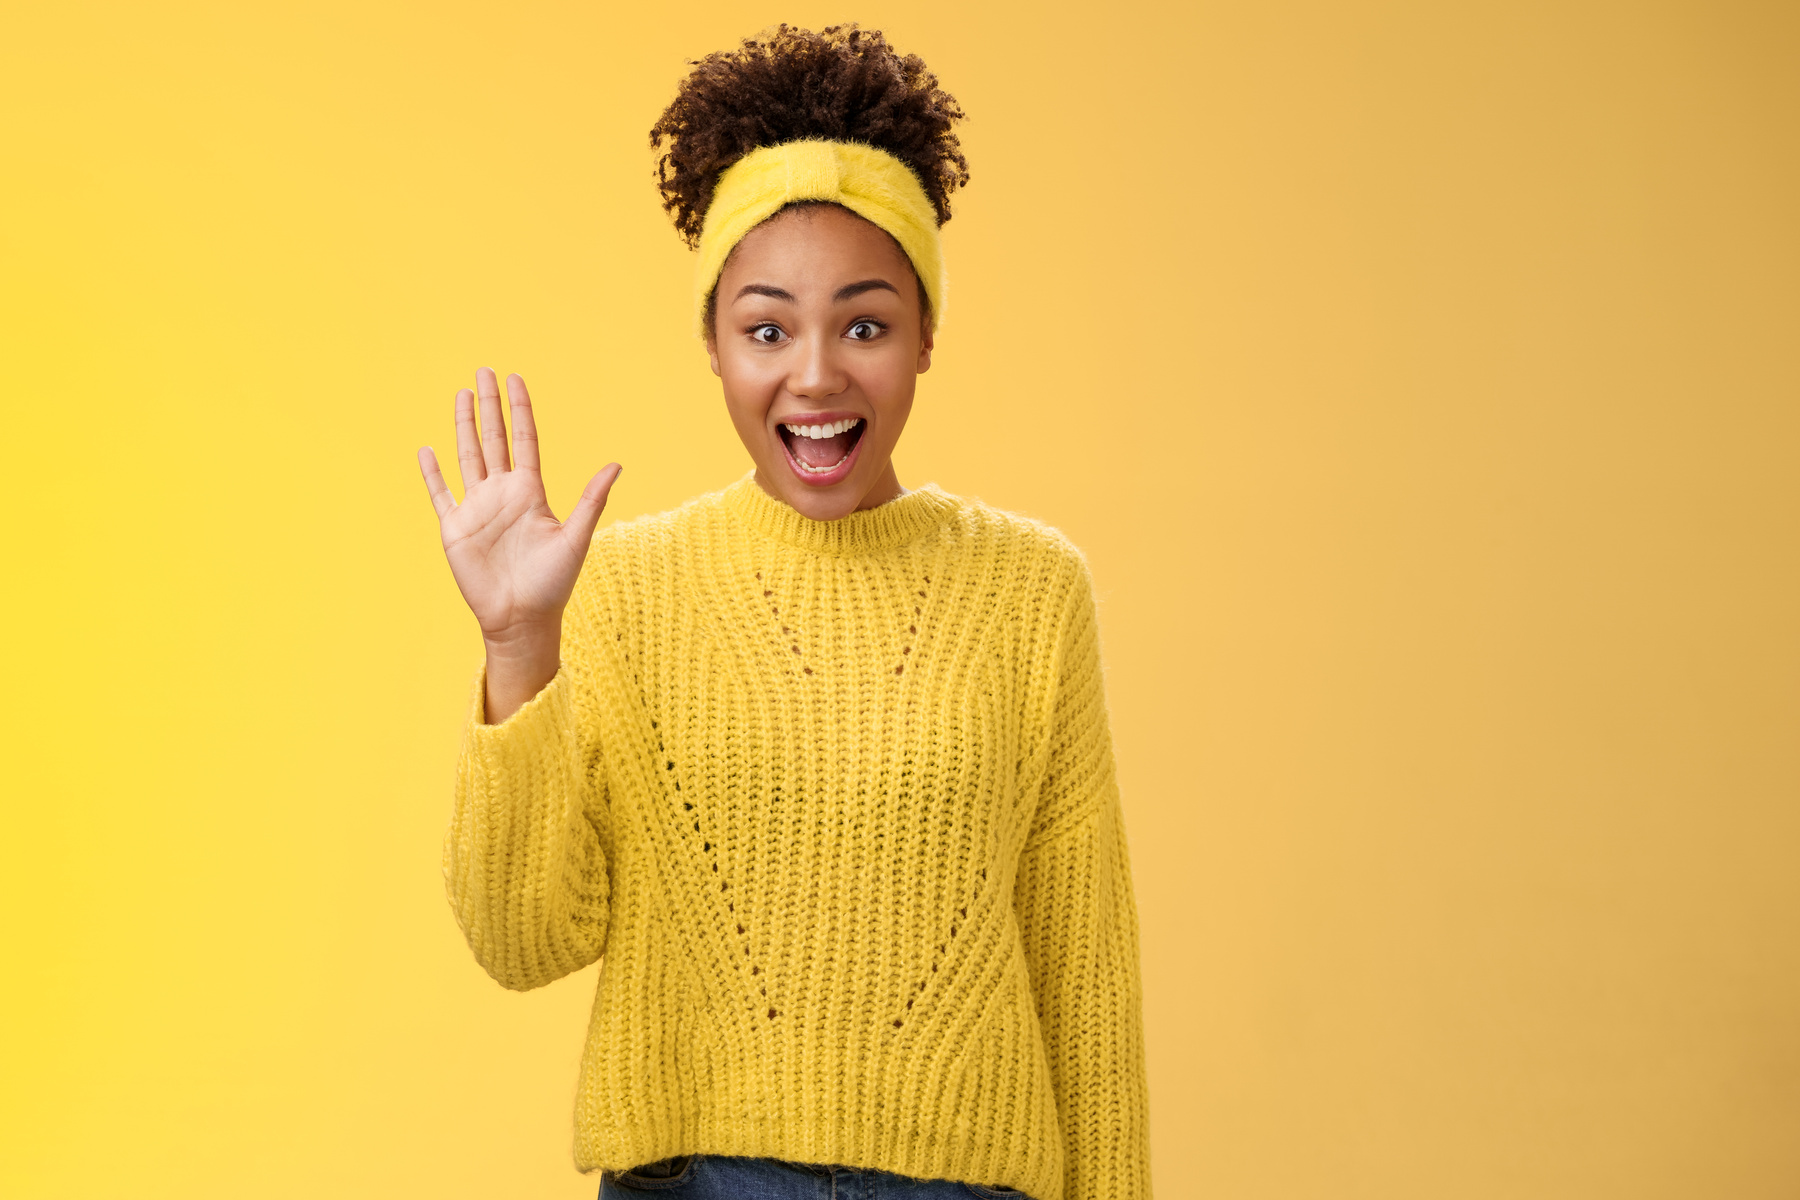 Friendly Outgoing Excited Cute Millennial Female Coworker Newbie Greeting Team Waving Palm Hi Hello Gesture Energized Get Know New People Welcoming Greeting Friends, Standing Yellow Background